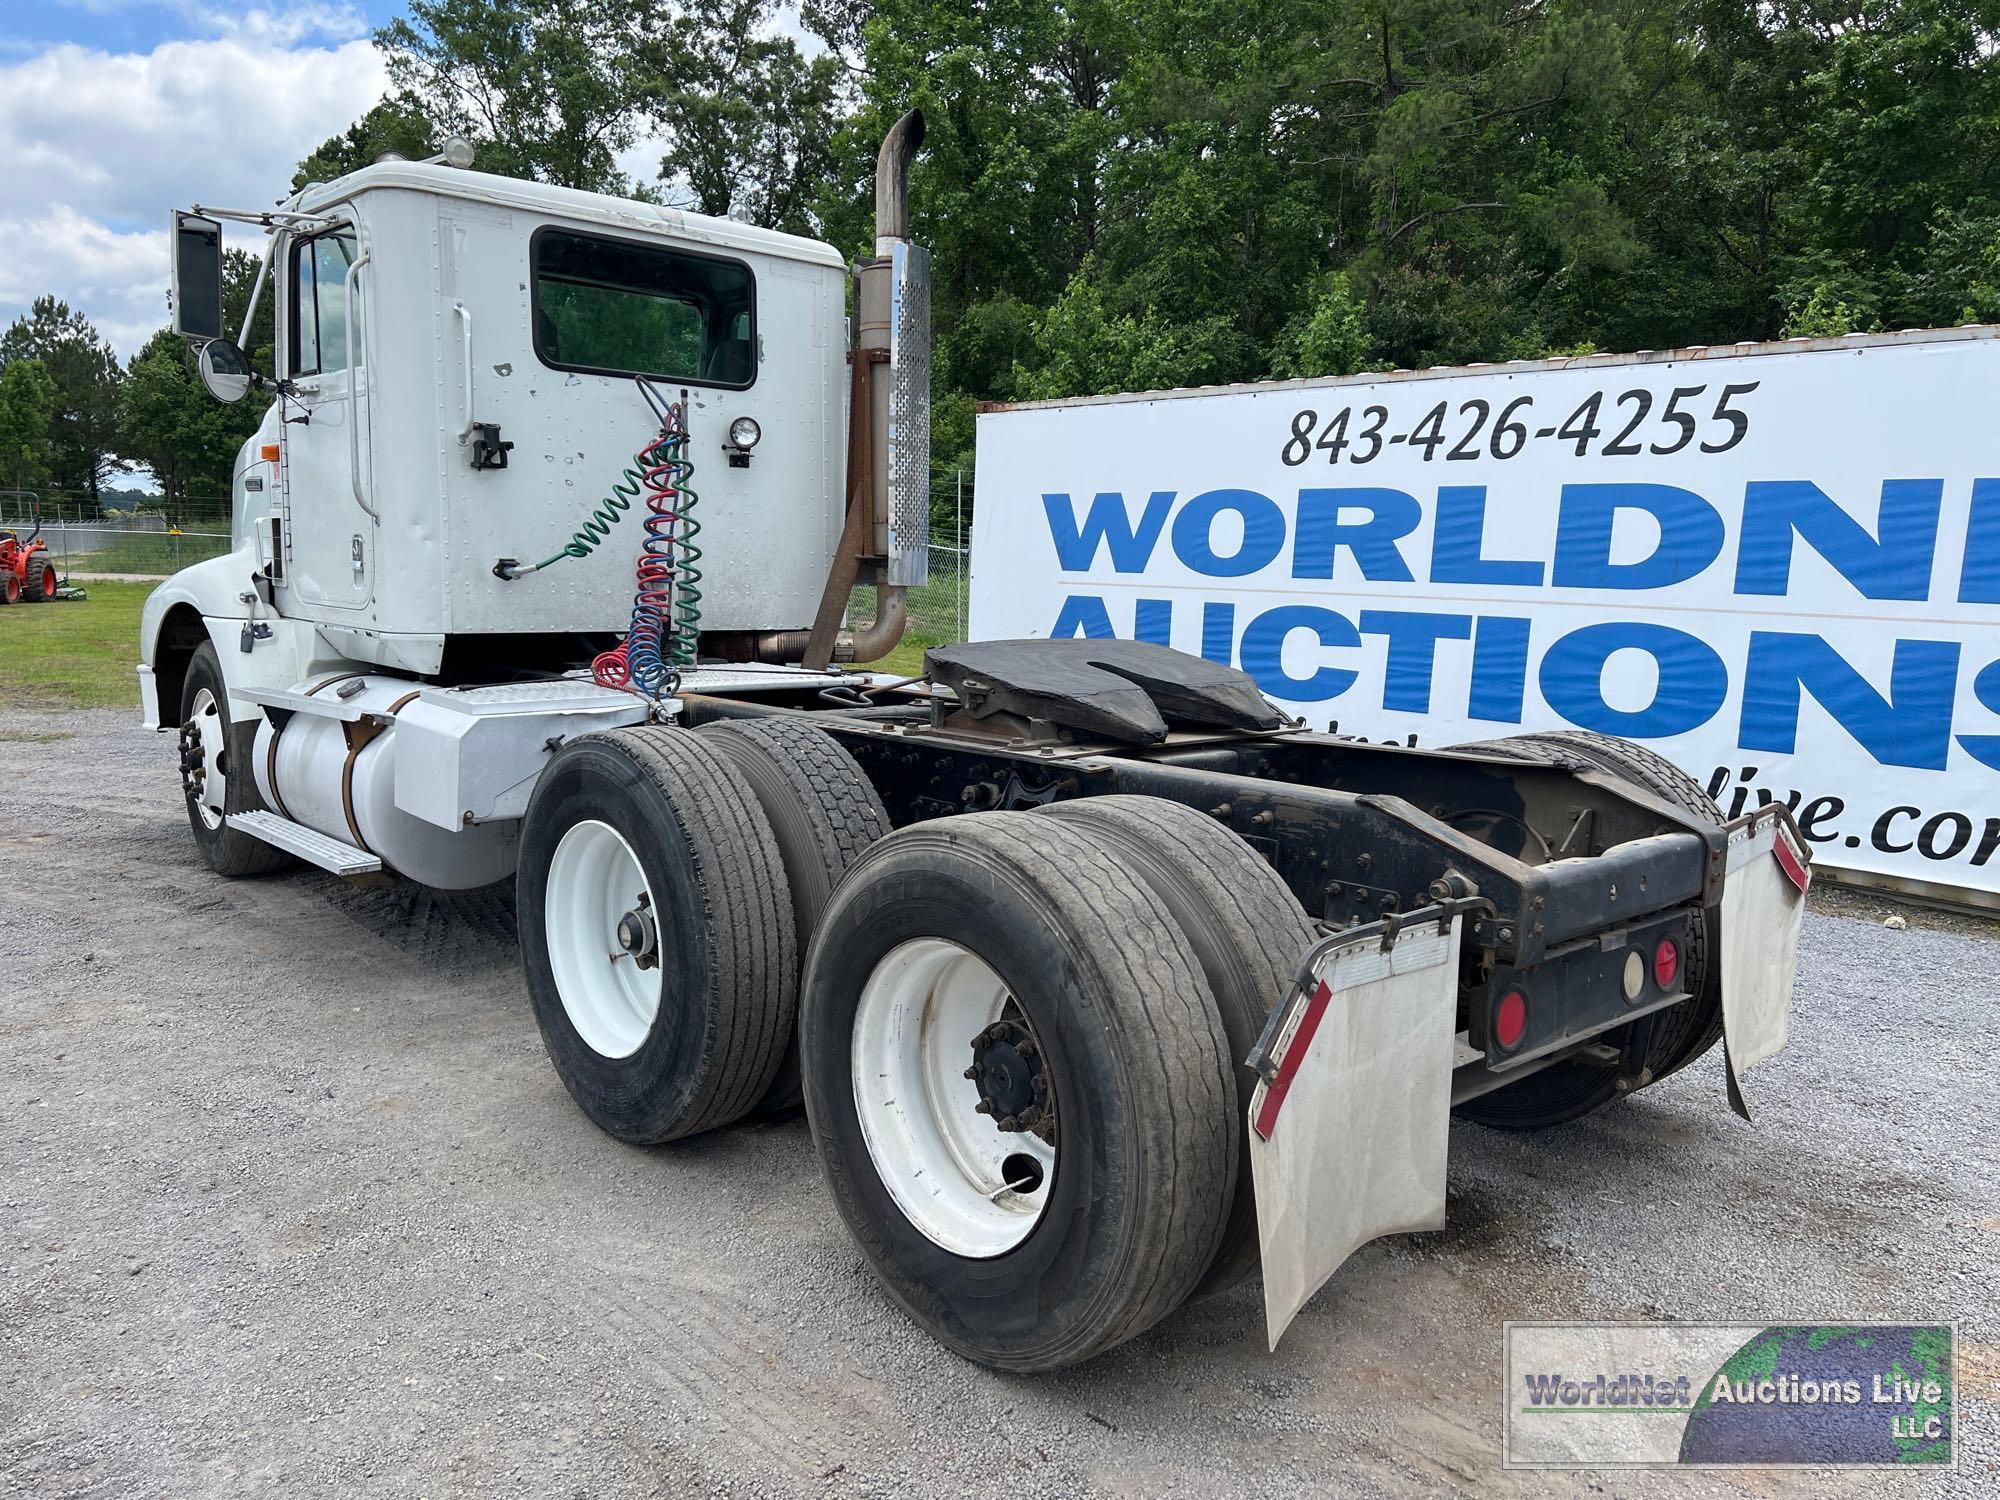 1997 INTERNATIONAL 9200 DAY CAB ROAD TRACTOR, VIN # 2HSFMAMR9VC031557